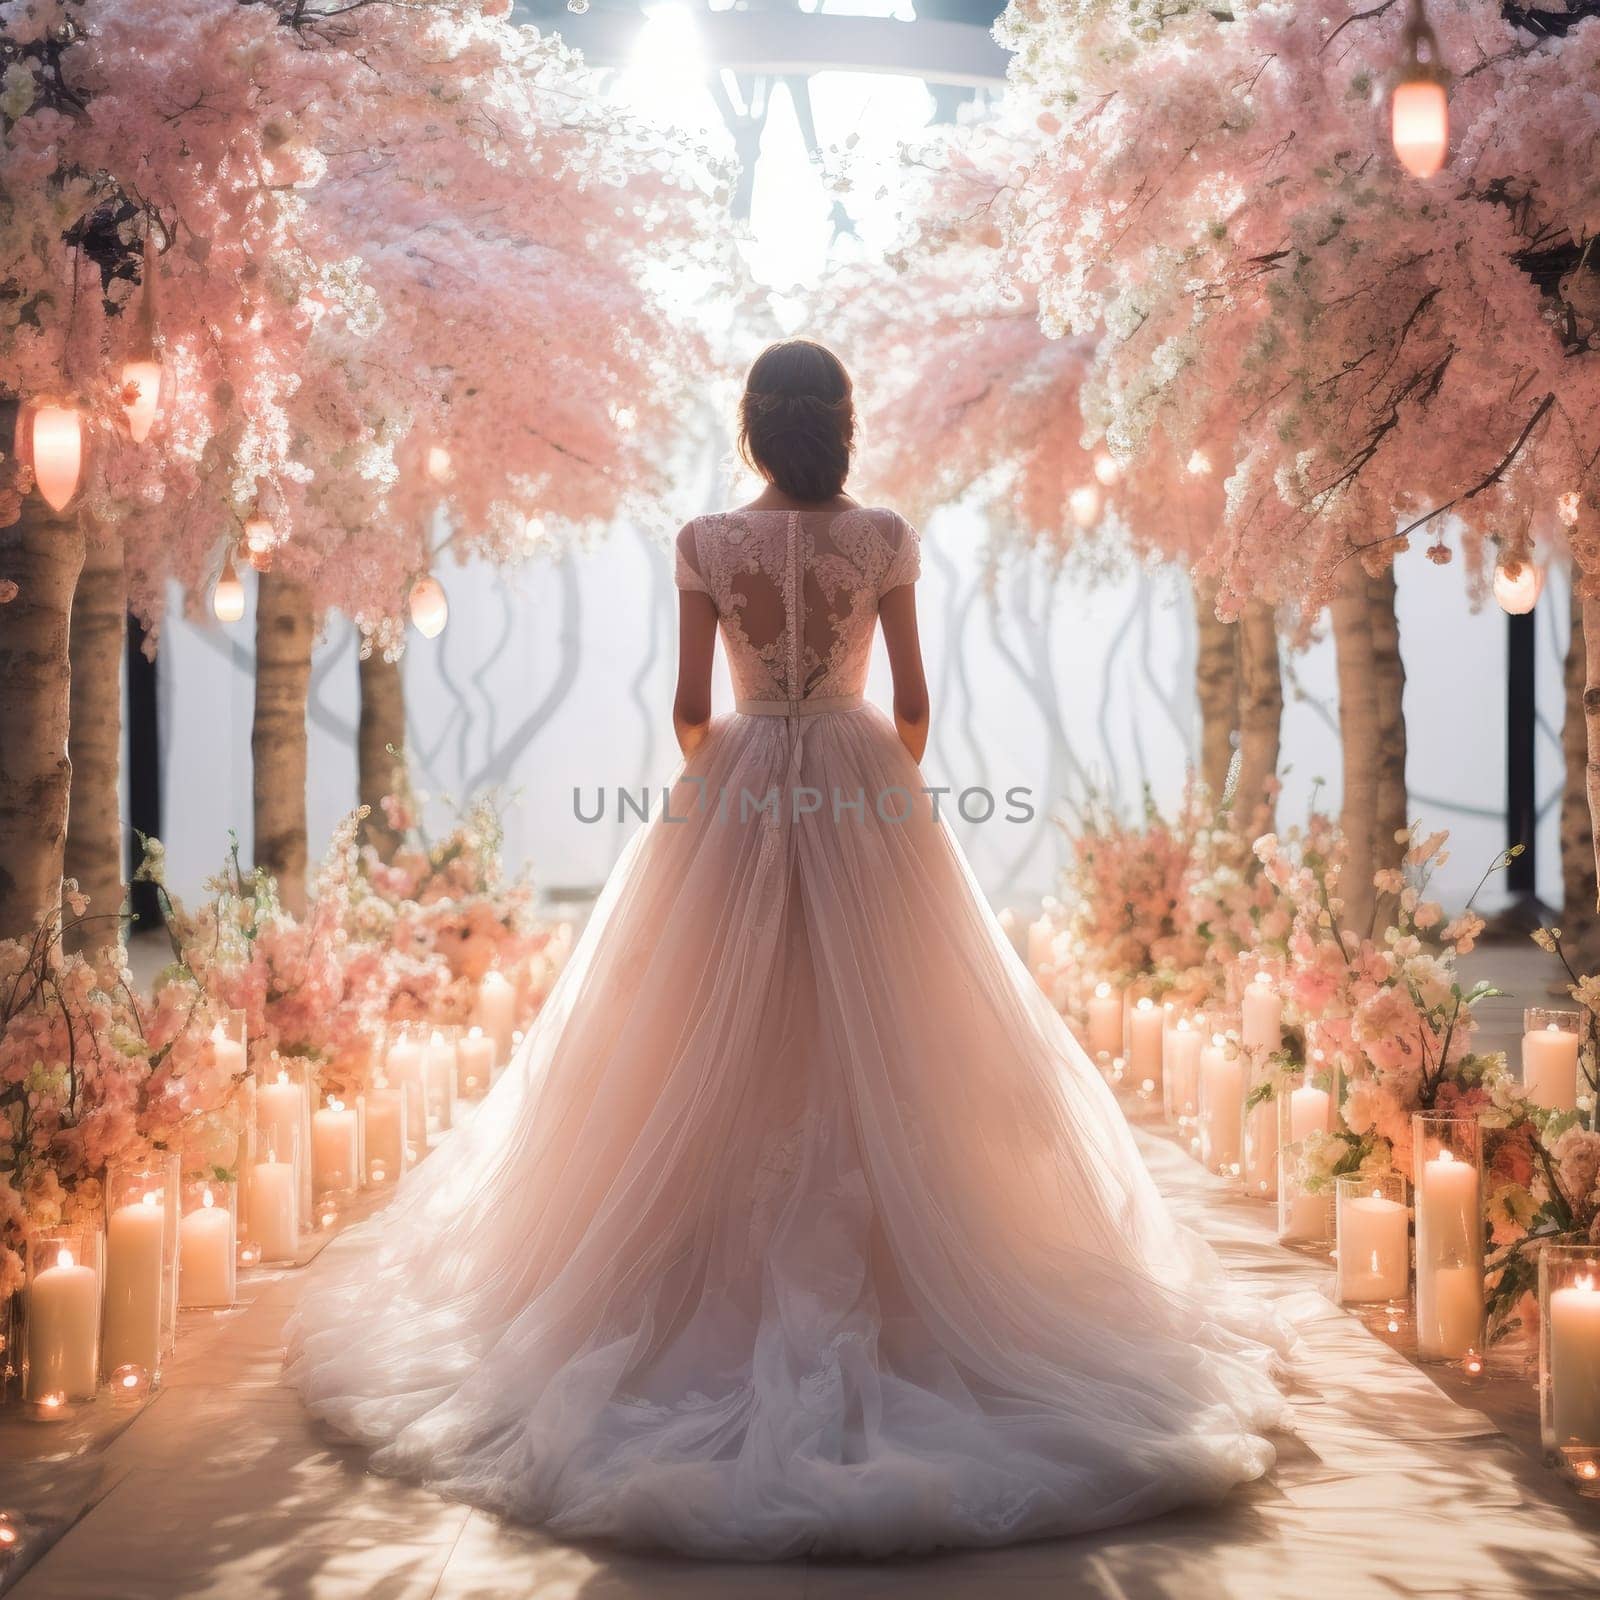 The bride at the perfect wedding by cherezoff